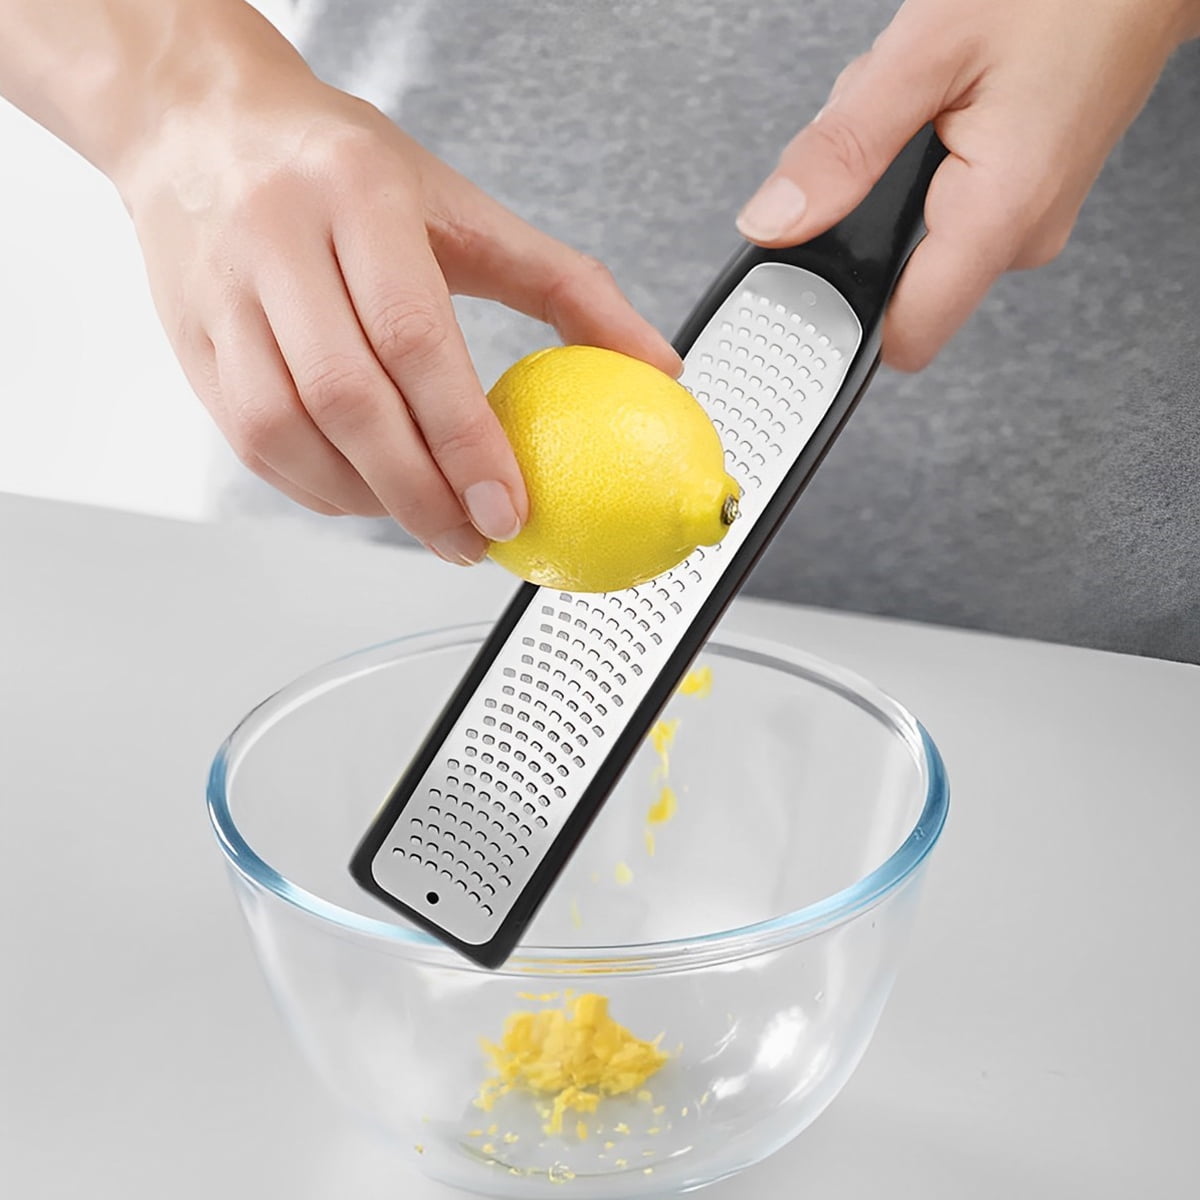  Experience the Best of Both Worlds with our Soft Touch Handle  Lemon Zester and Cheese Grater - Ideal for Shredding Cheese and Zesting  Citrus with Ease! : Home & Kitchen